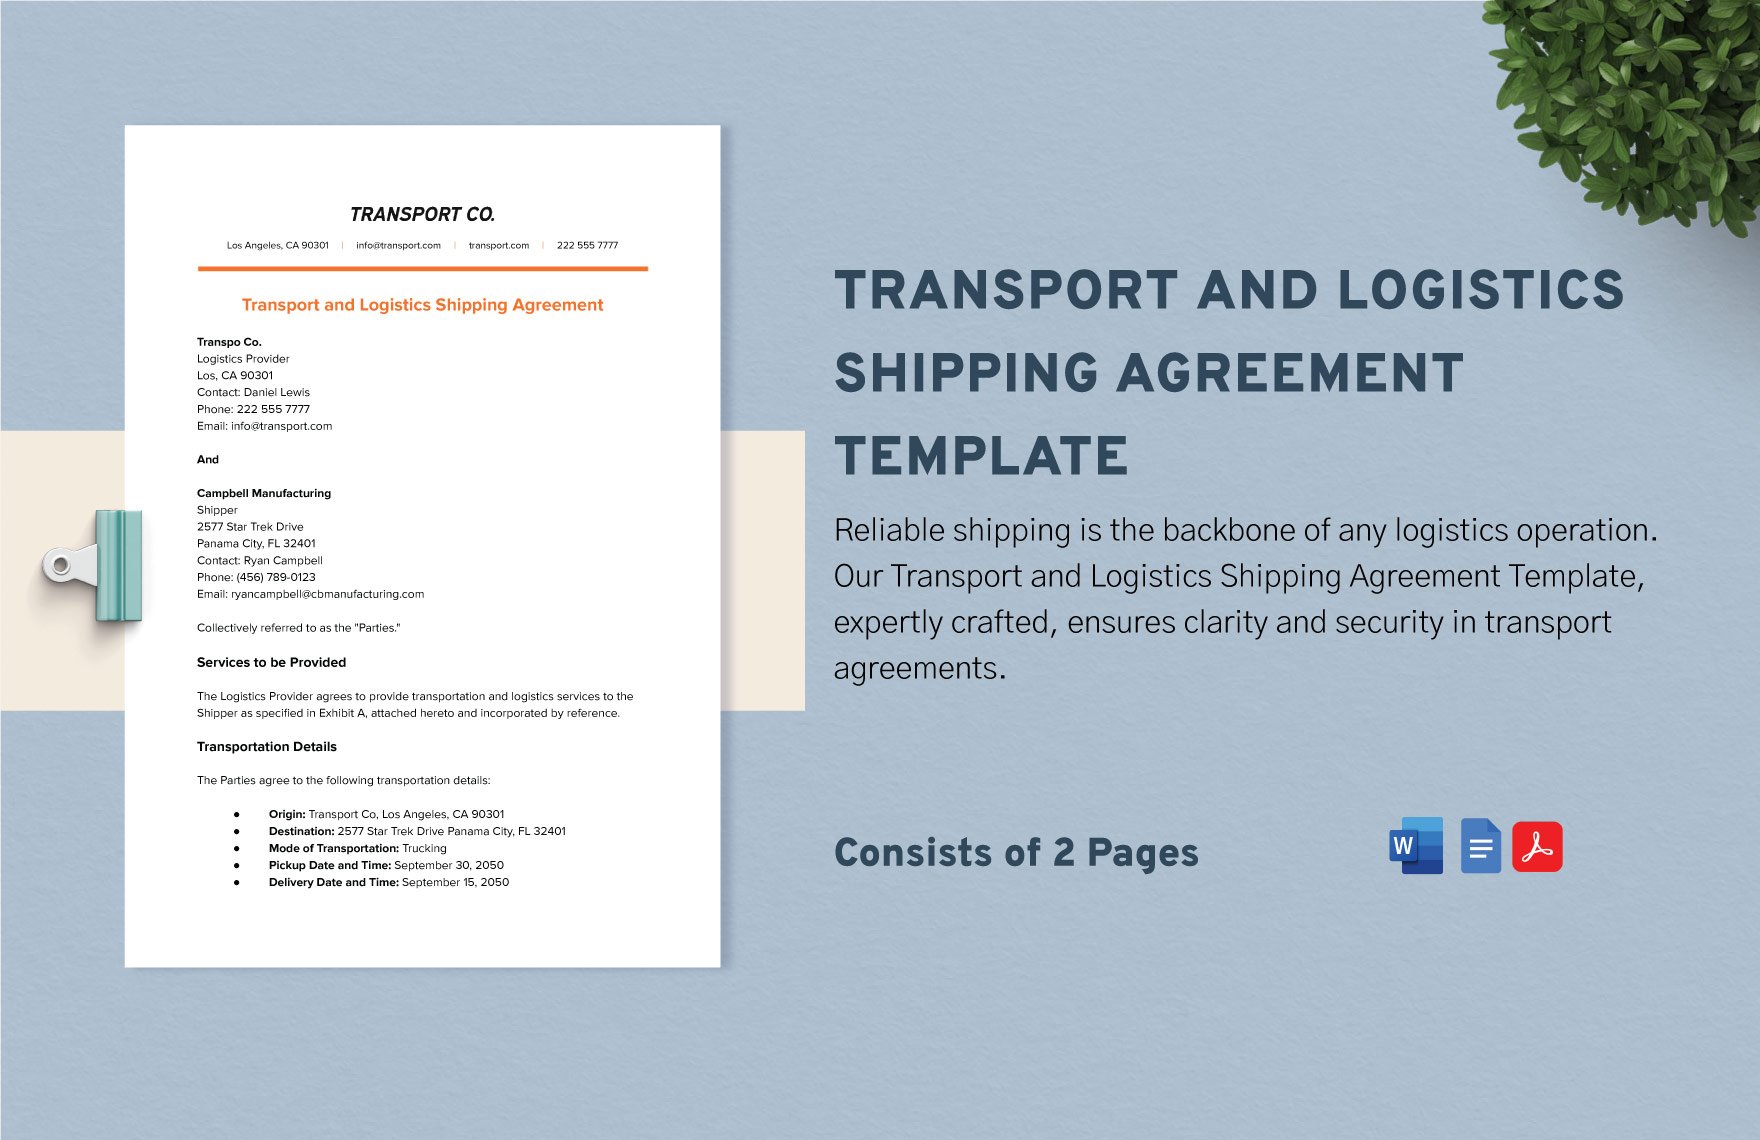 Transport and Logistics Shipping Agreement Template in Word, Google Docs, PDF